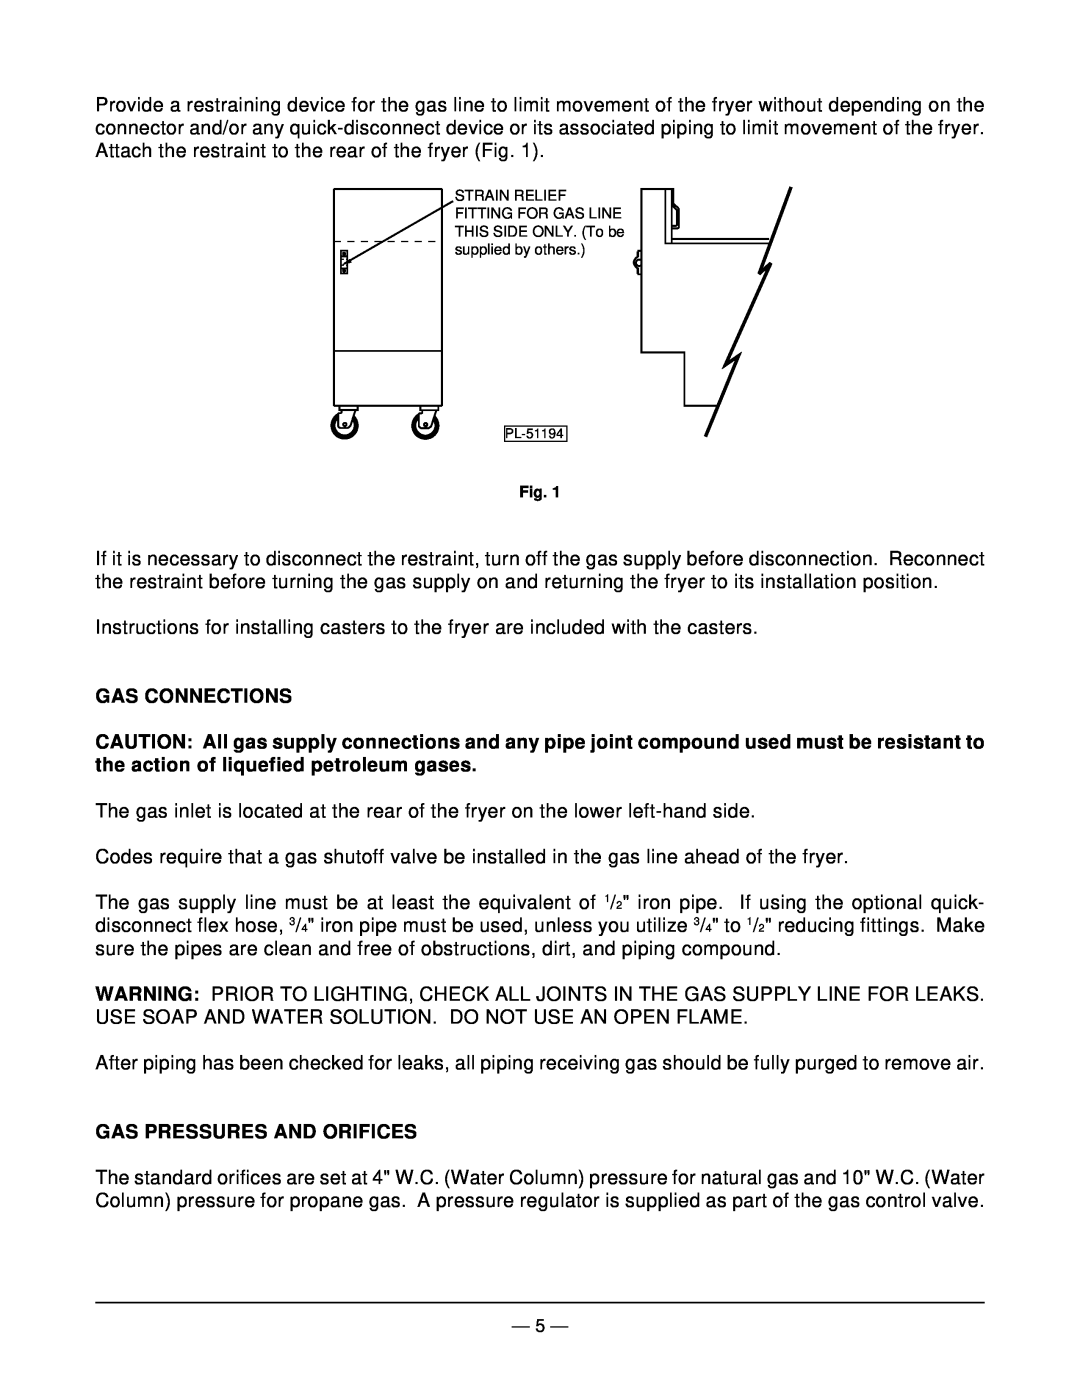 Vulcan-Hart TK65 operation manual Gas Connections, Gas Pressures And Orifices 